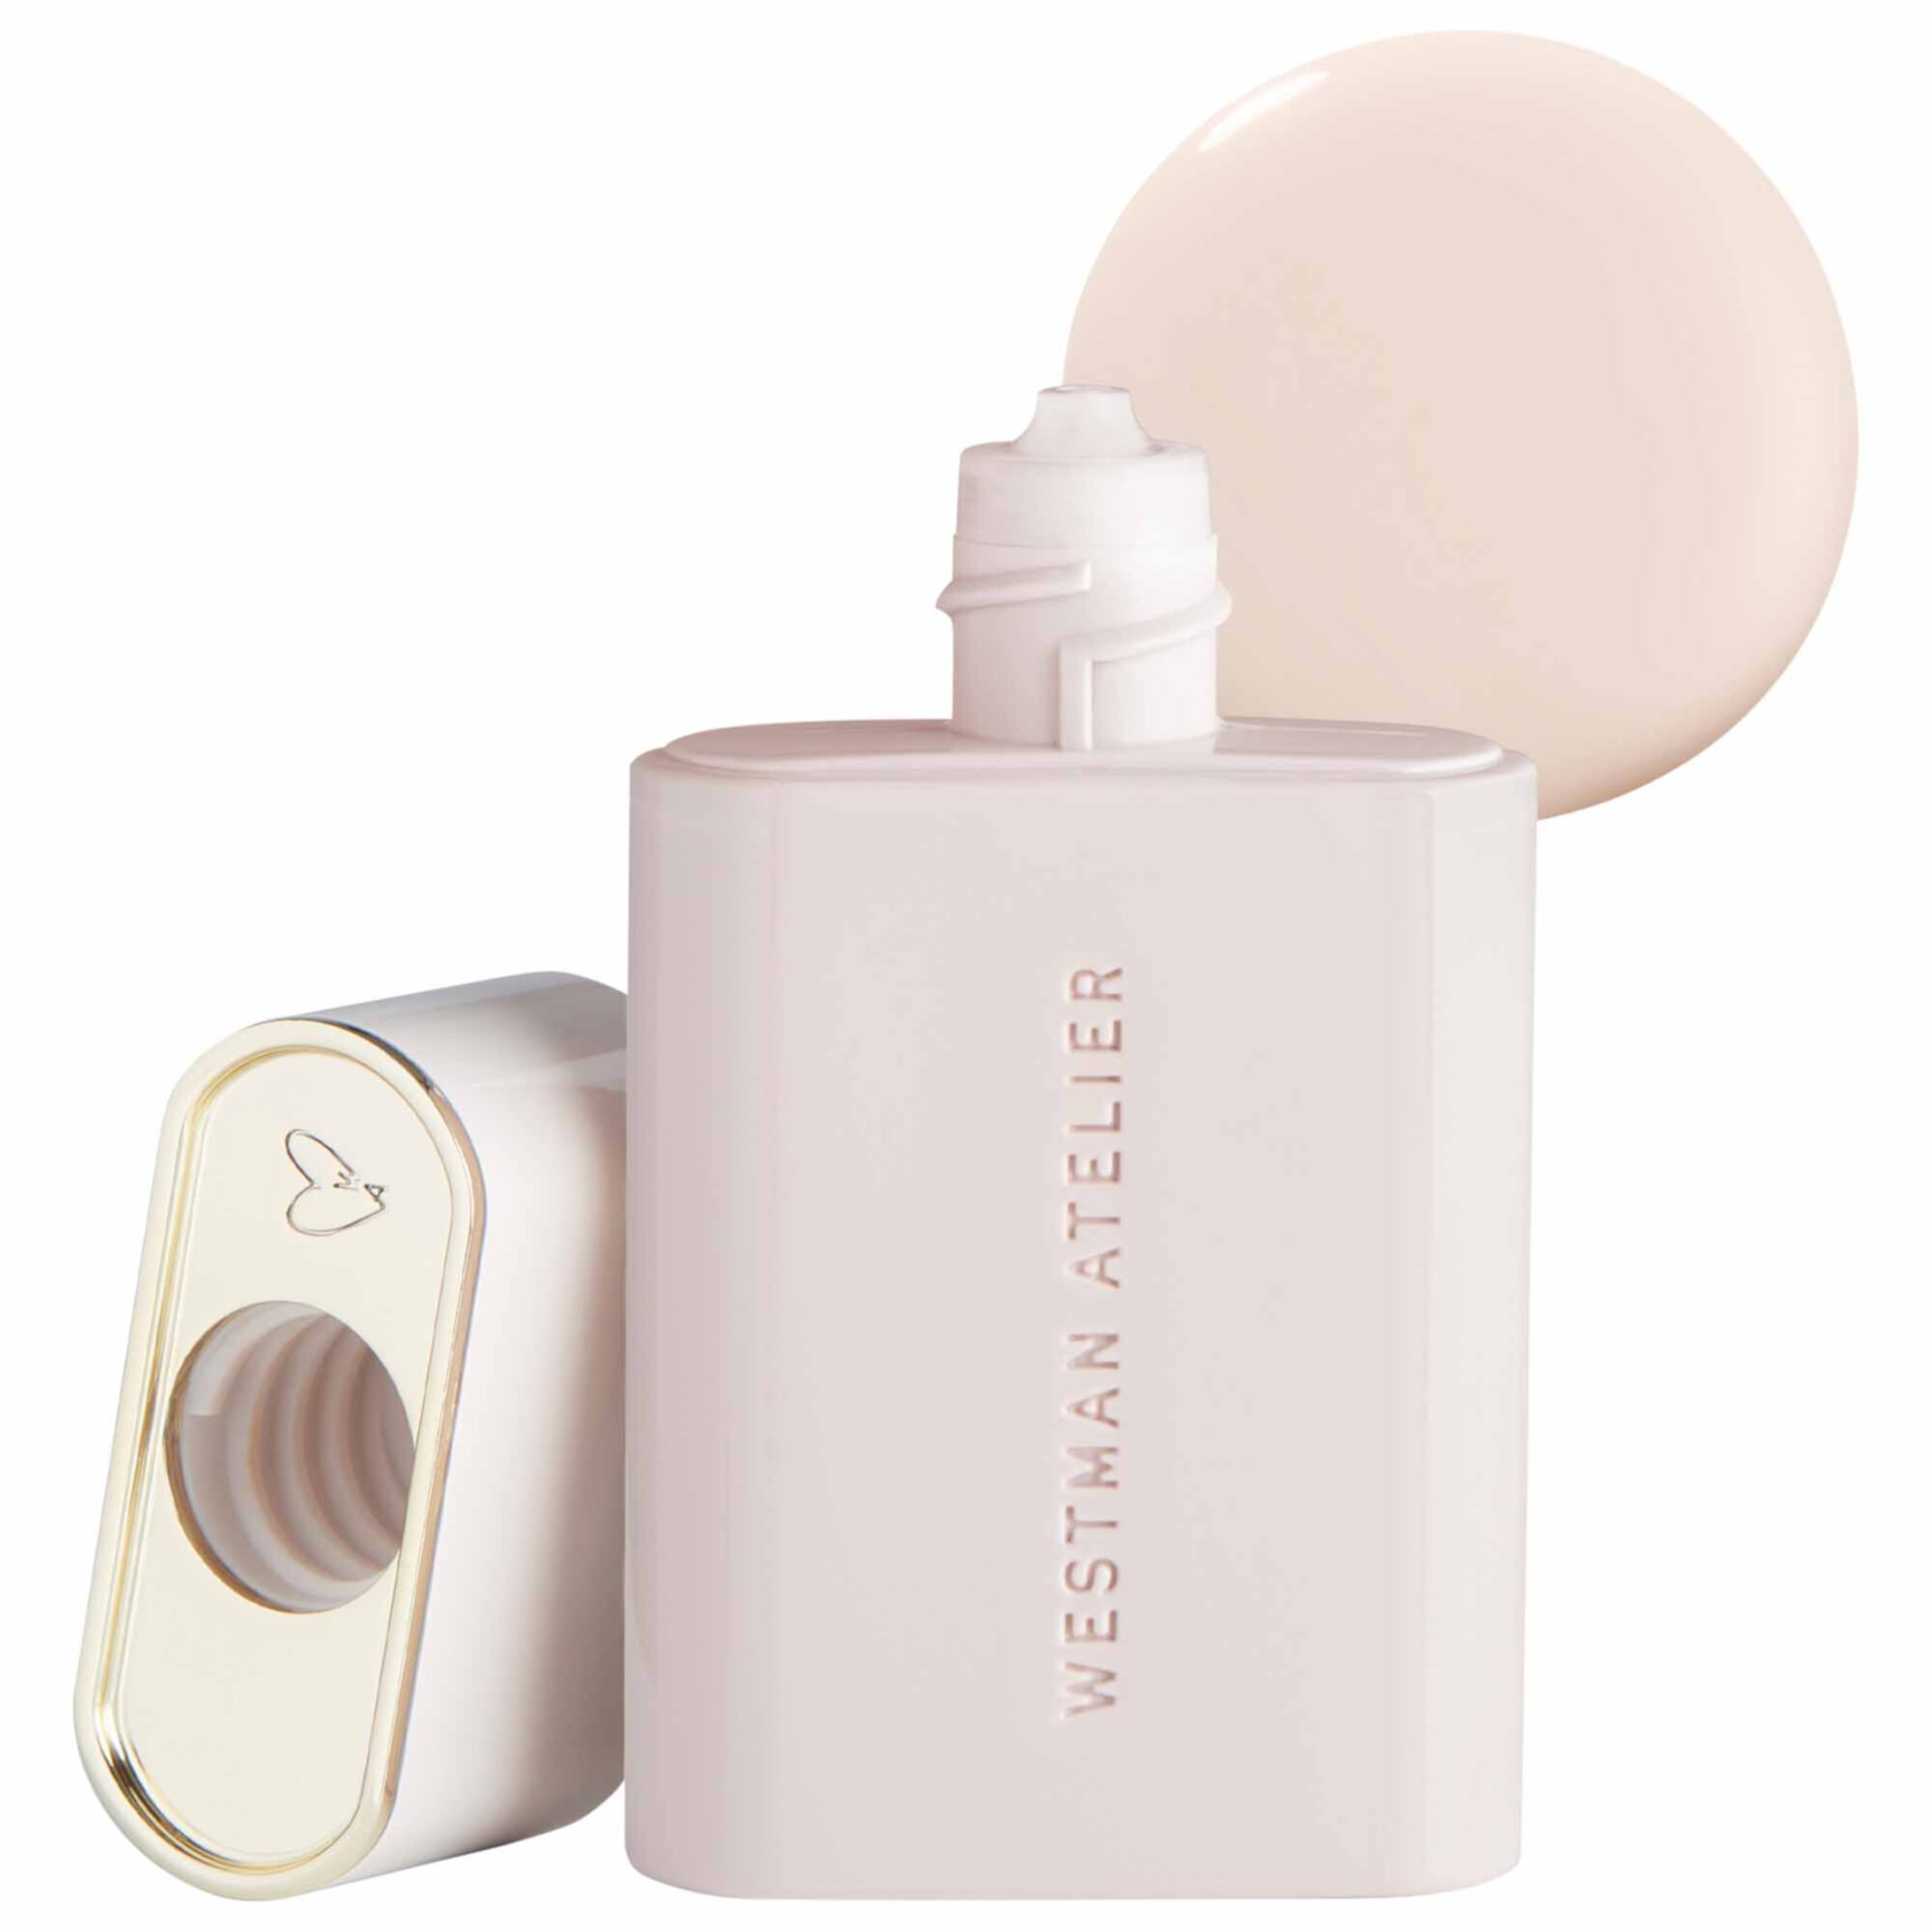 Vital Skincare Complexion Drops Dewy Skin Tint Westman Atelier